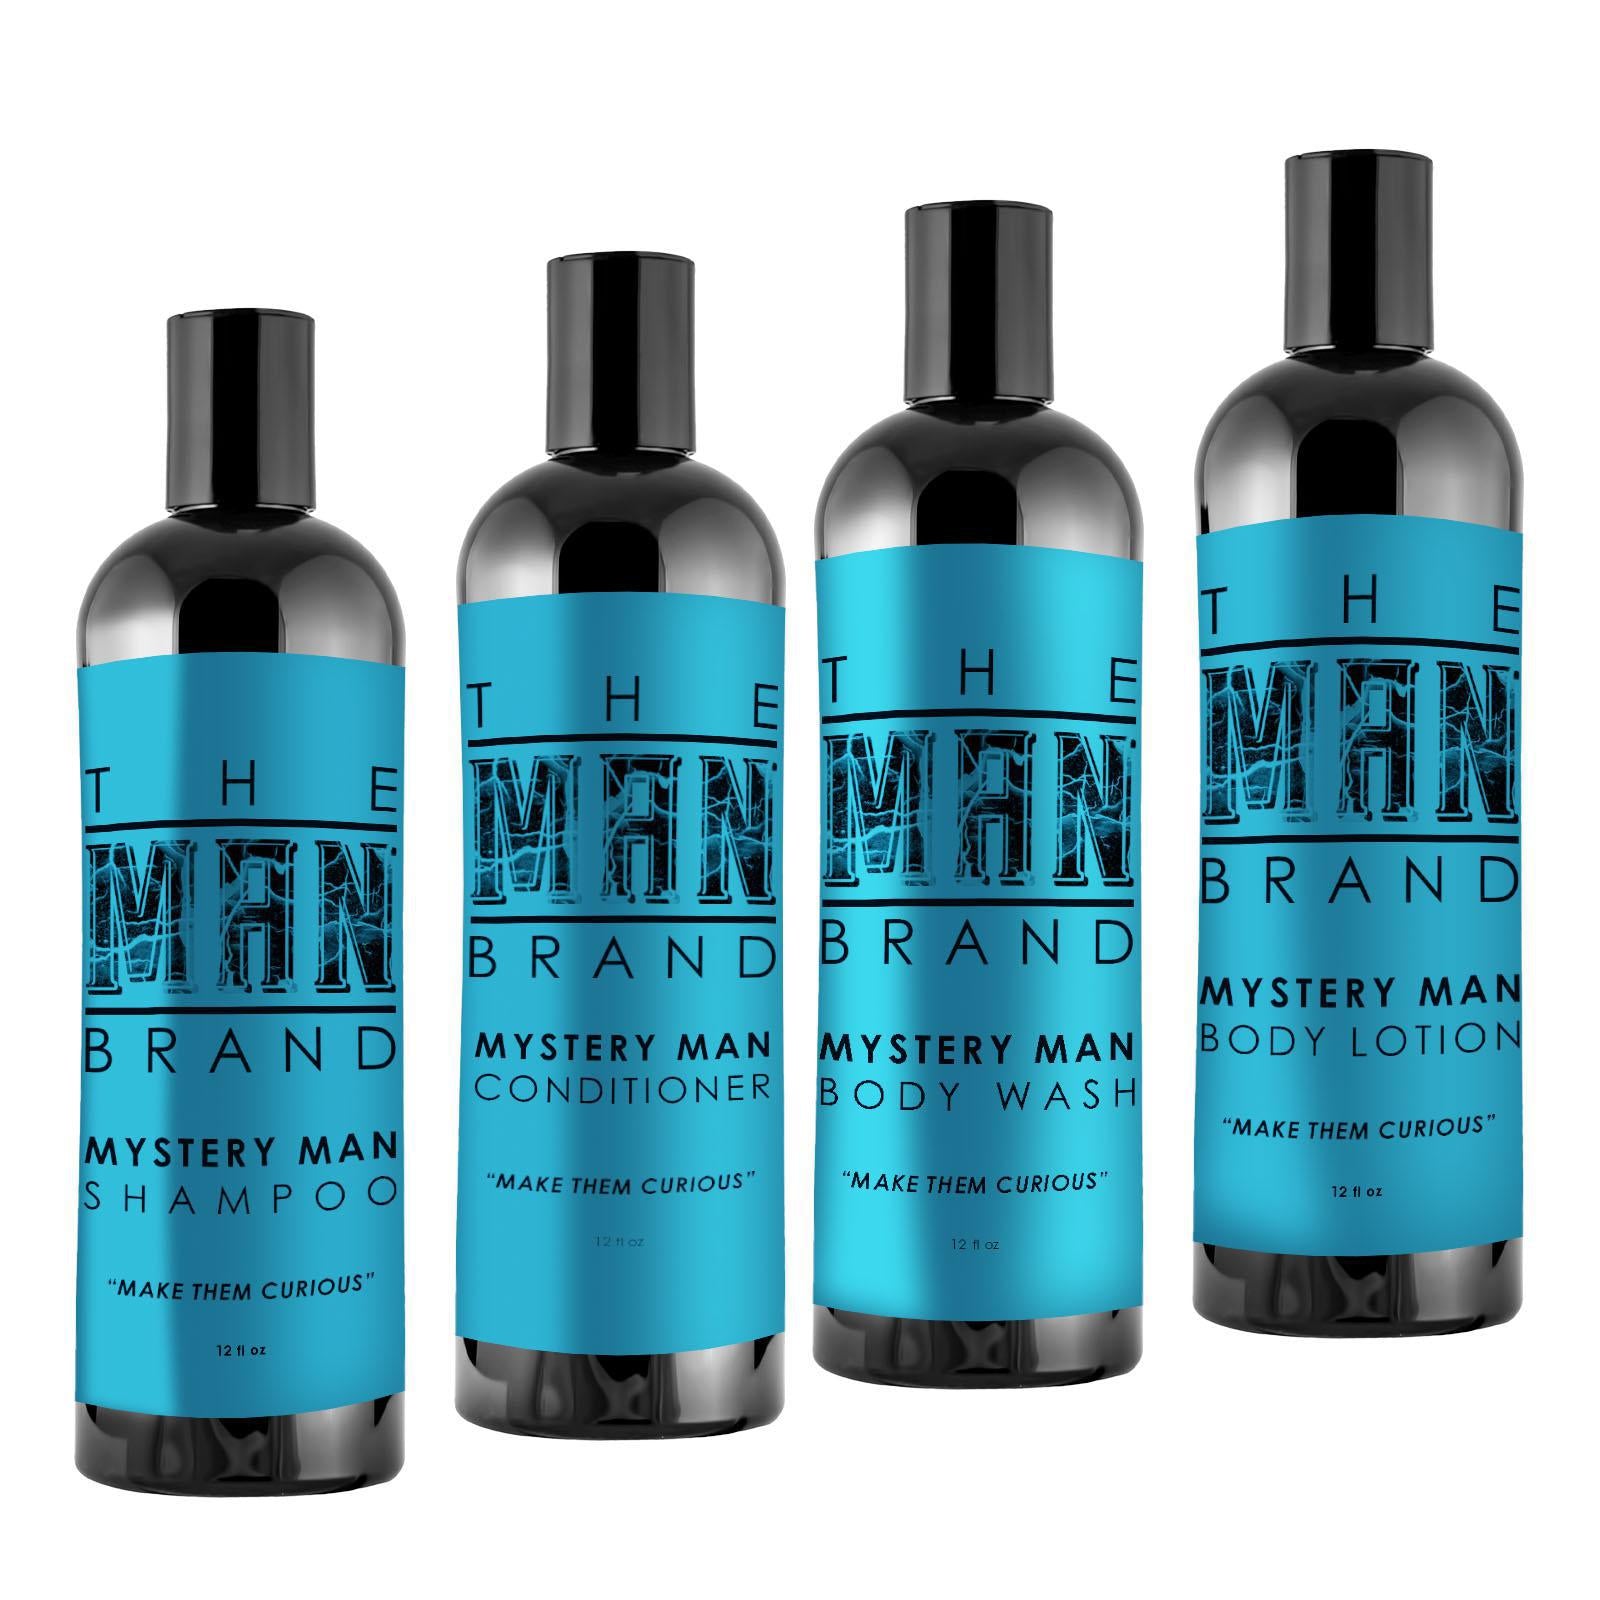 Get Clean Men's Grooming Kit: Shampoo, Conditioner, Body Wash, and Body Lotion